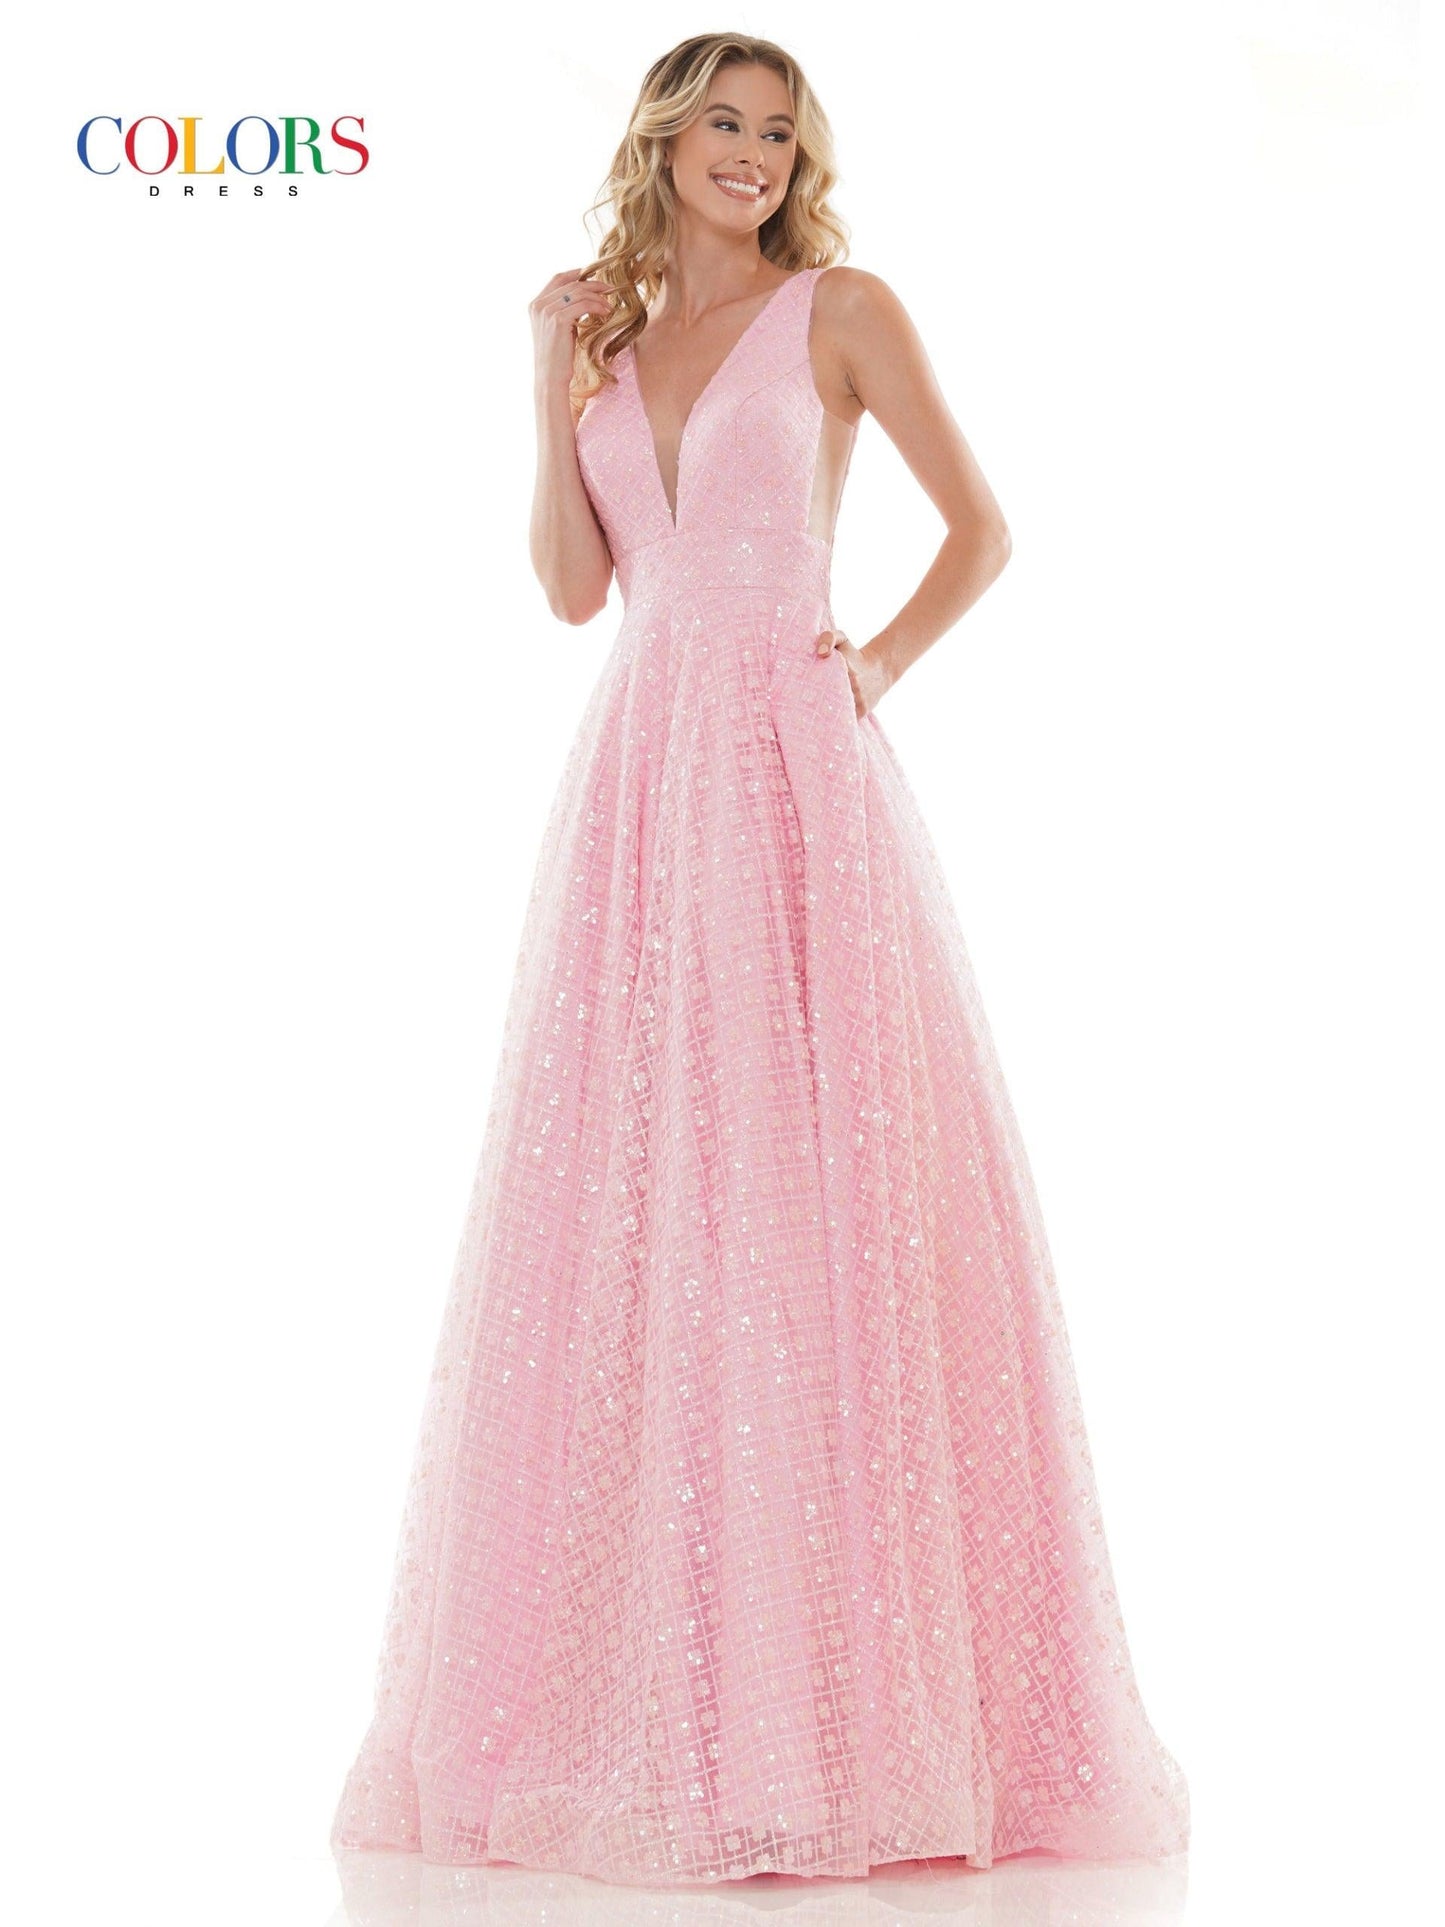 Colors Prom Long Glitter Ball Gown 2170 - The Dress Outlet